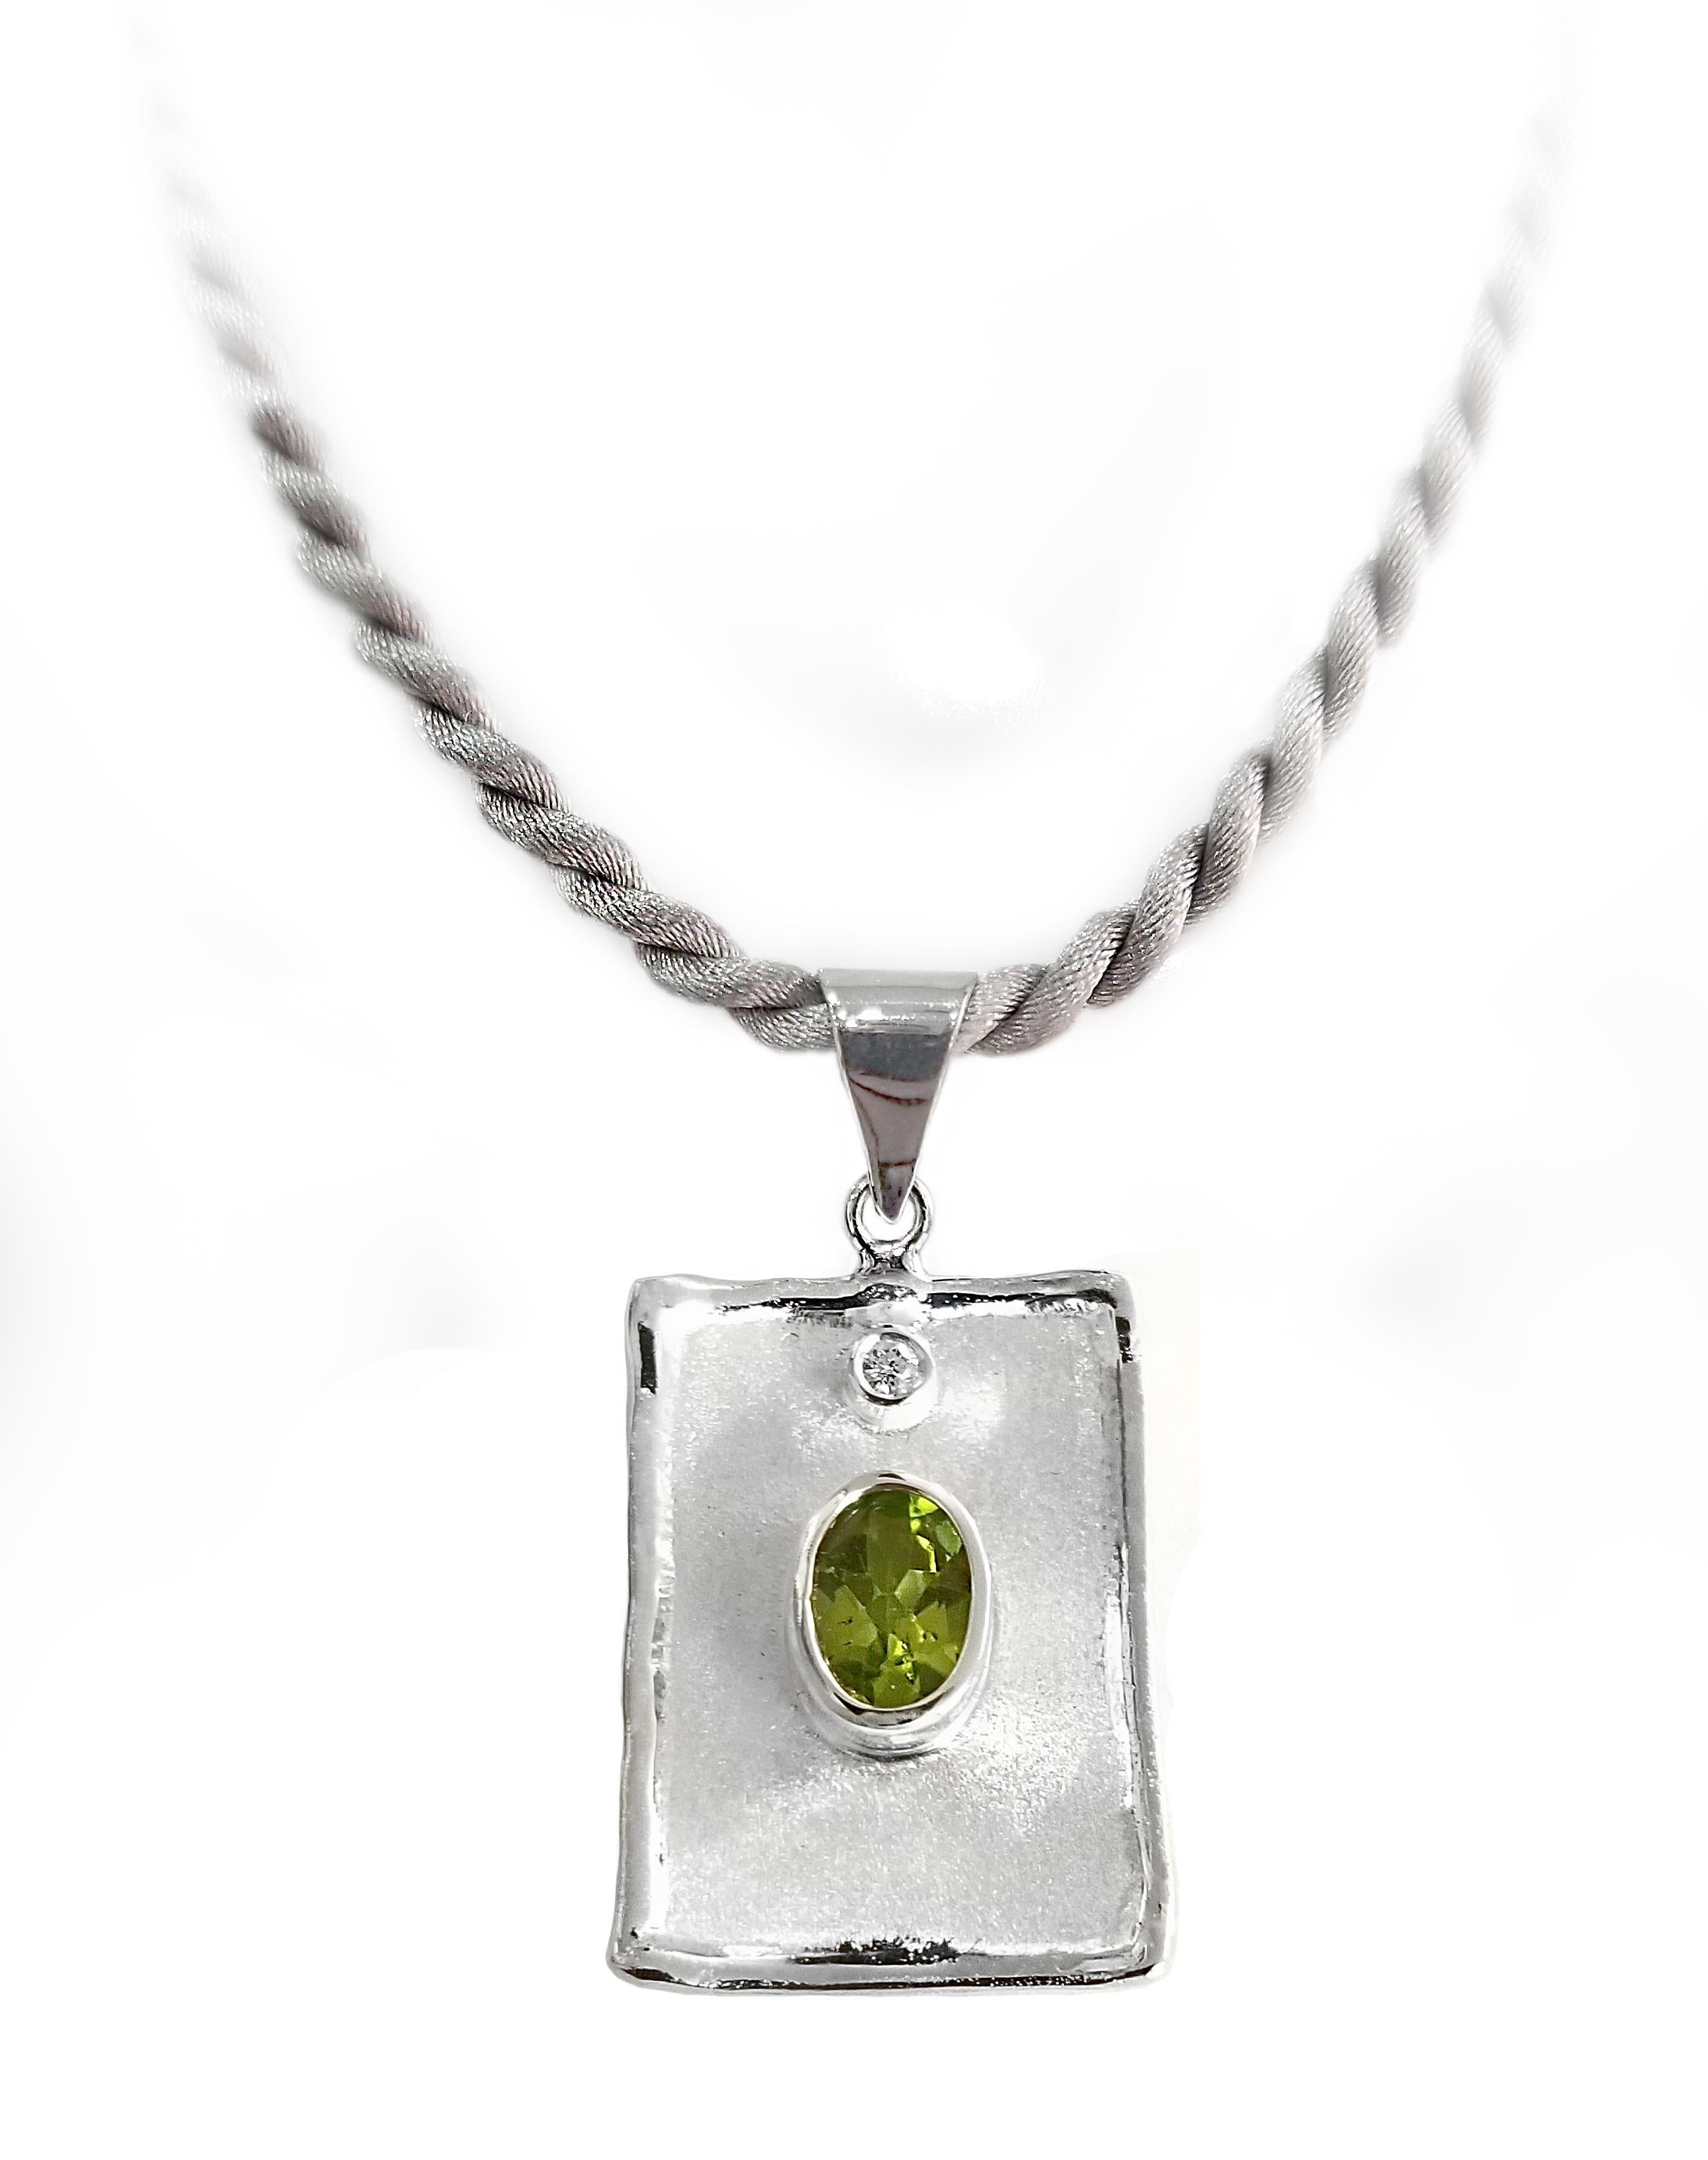 Yianni Creations Ammos Collection 100% Handmade Artisan Pendant from Fine Silver featuring 2 Carat Oval Cut Peridot accompanied by 0.03 Carat Brilliant Cut White Diamond complemented by unique techniques of craftsmanship - brushed texture and